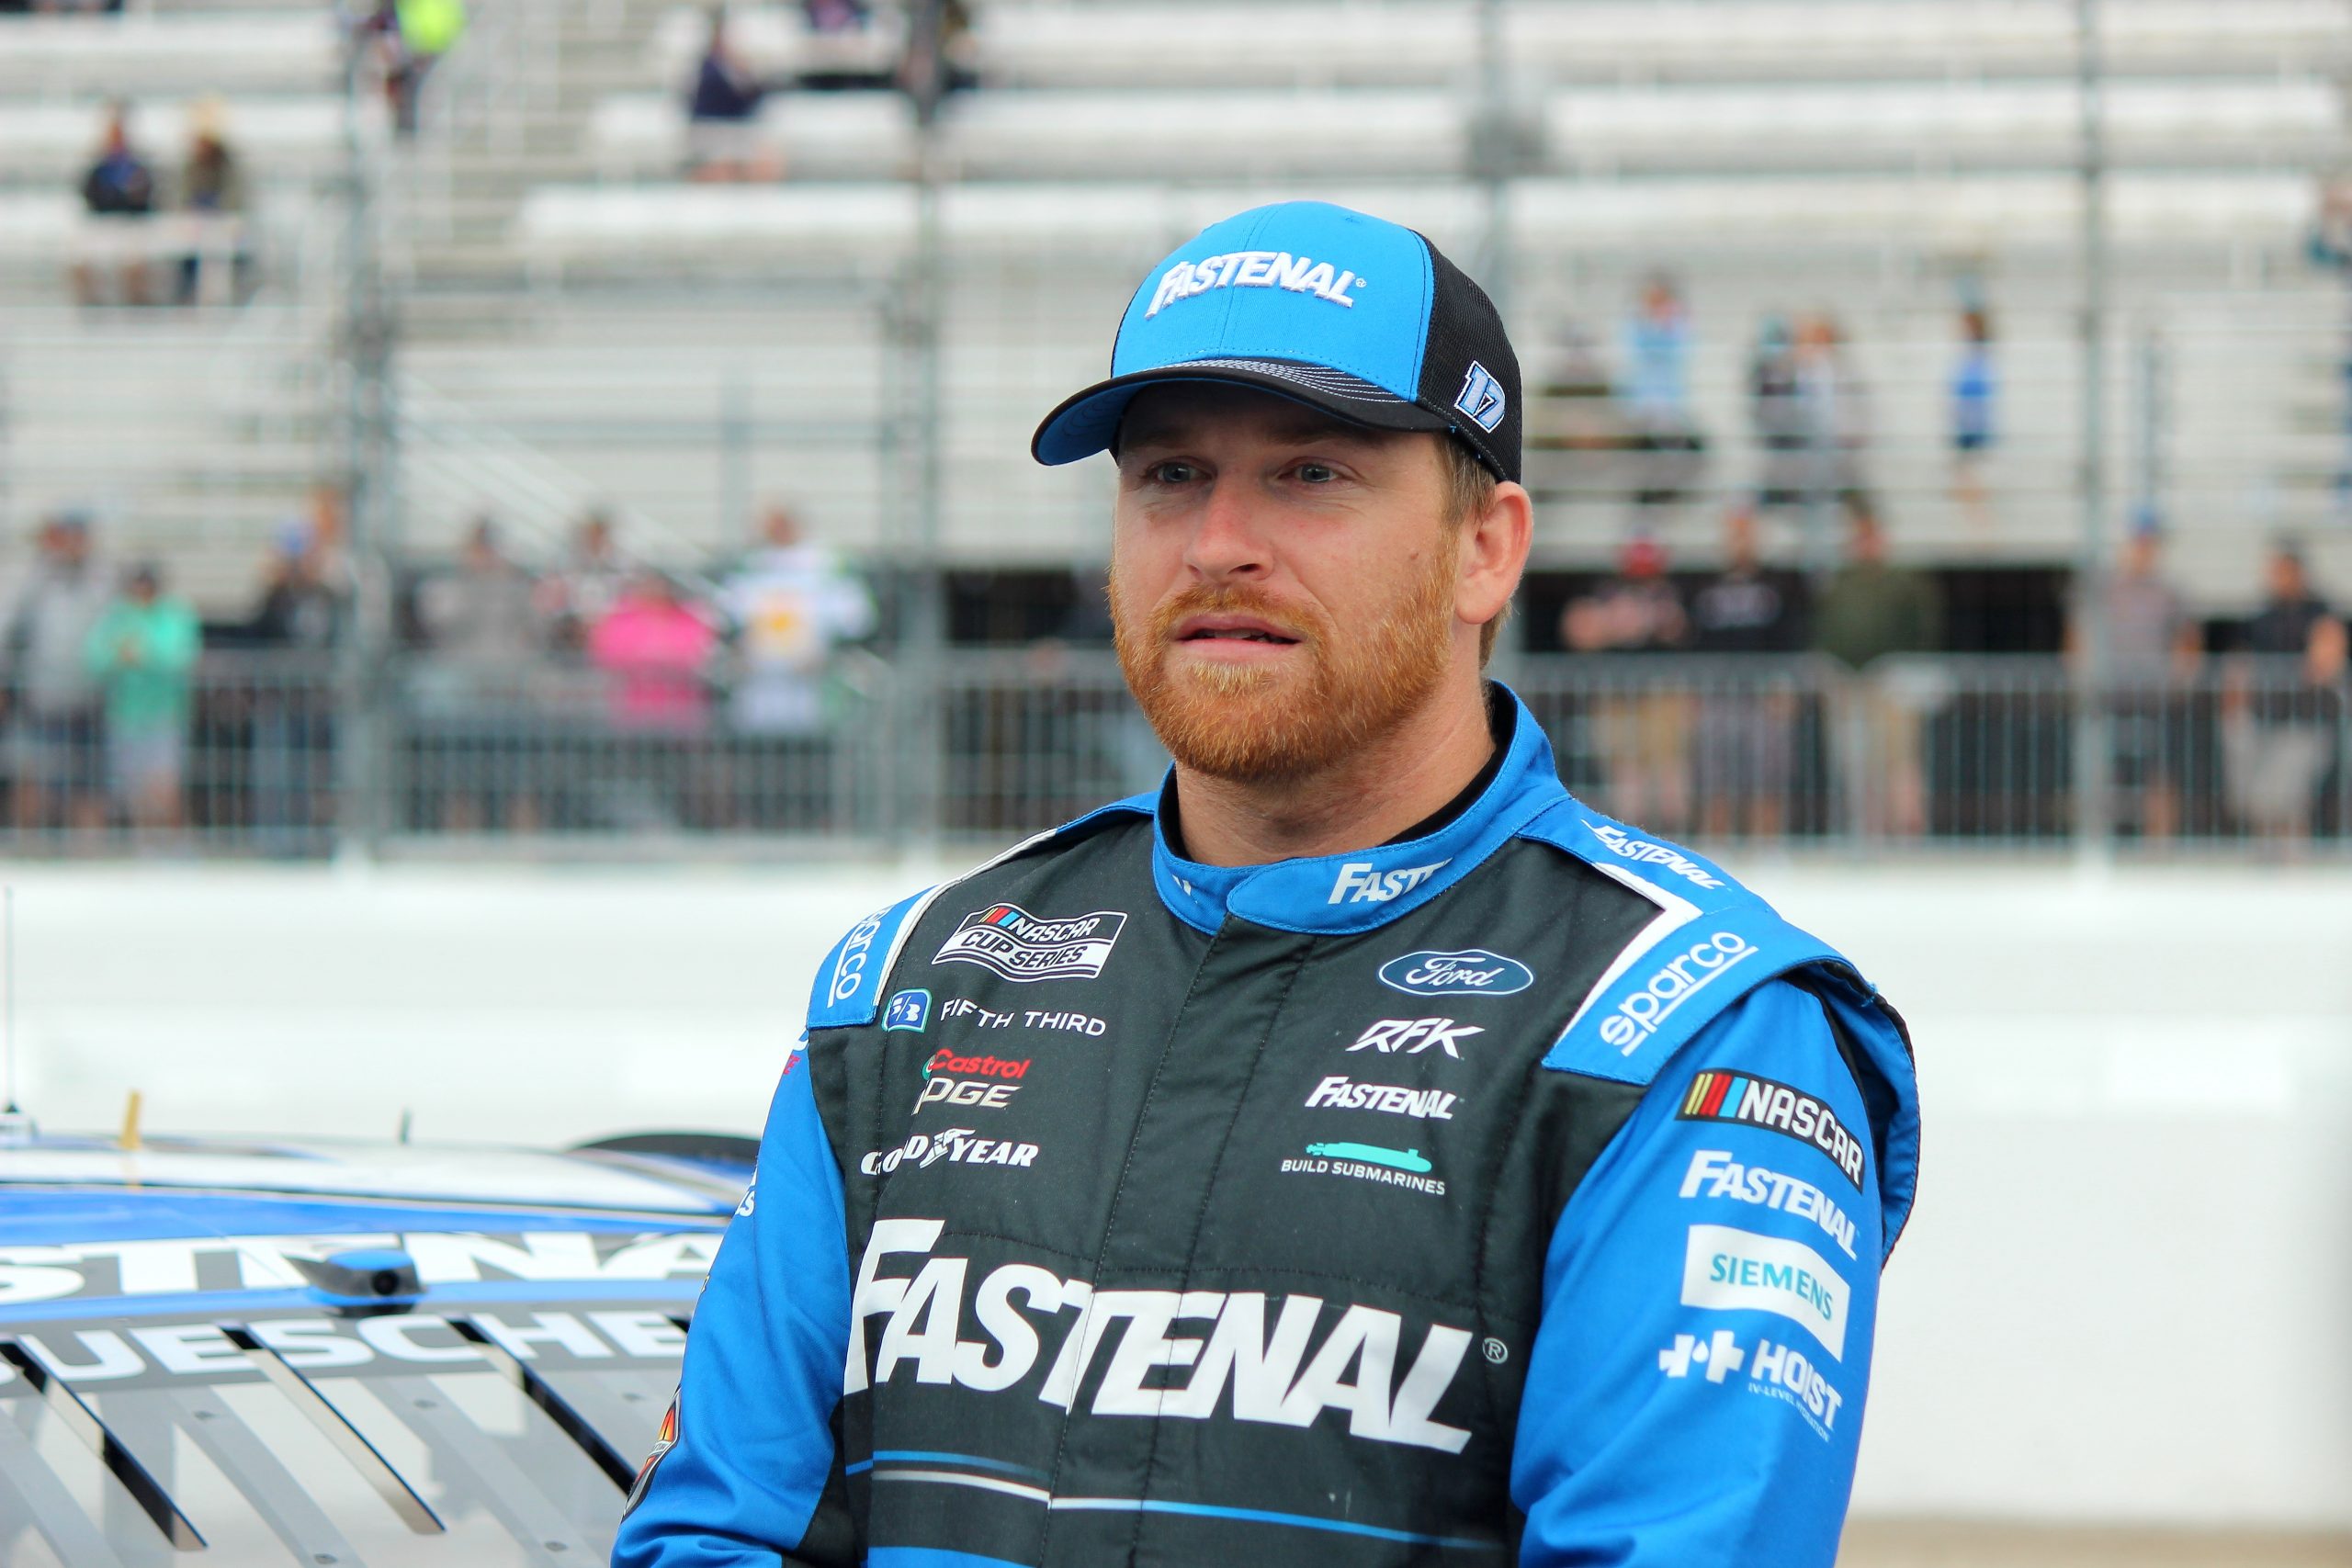 Chris Buescher is happy with RFK's turnaround in recent years, but still wants more.